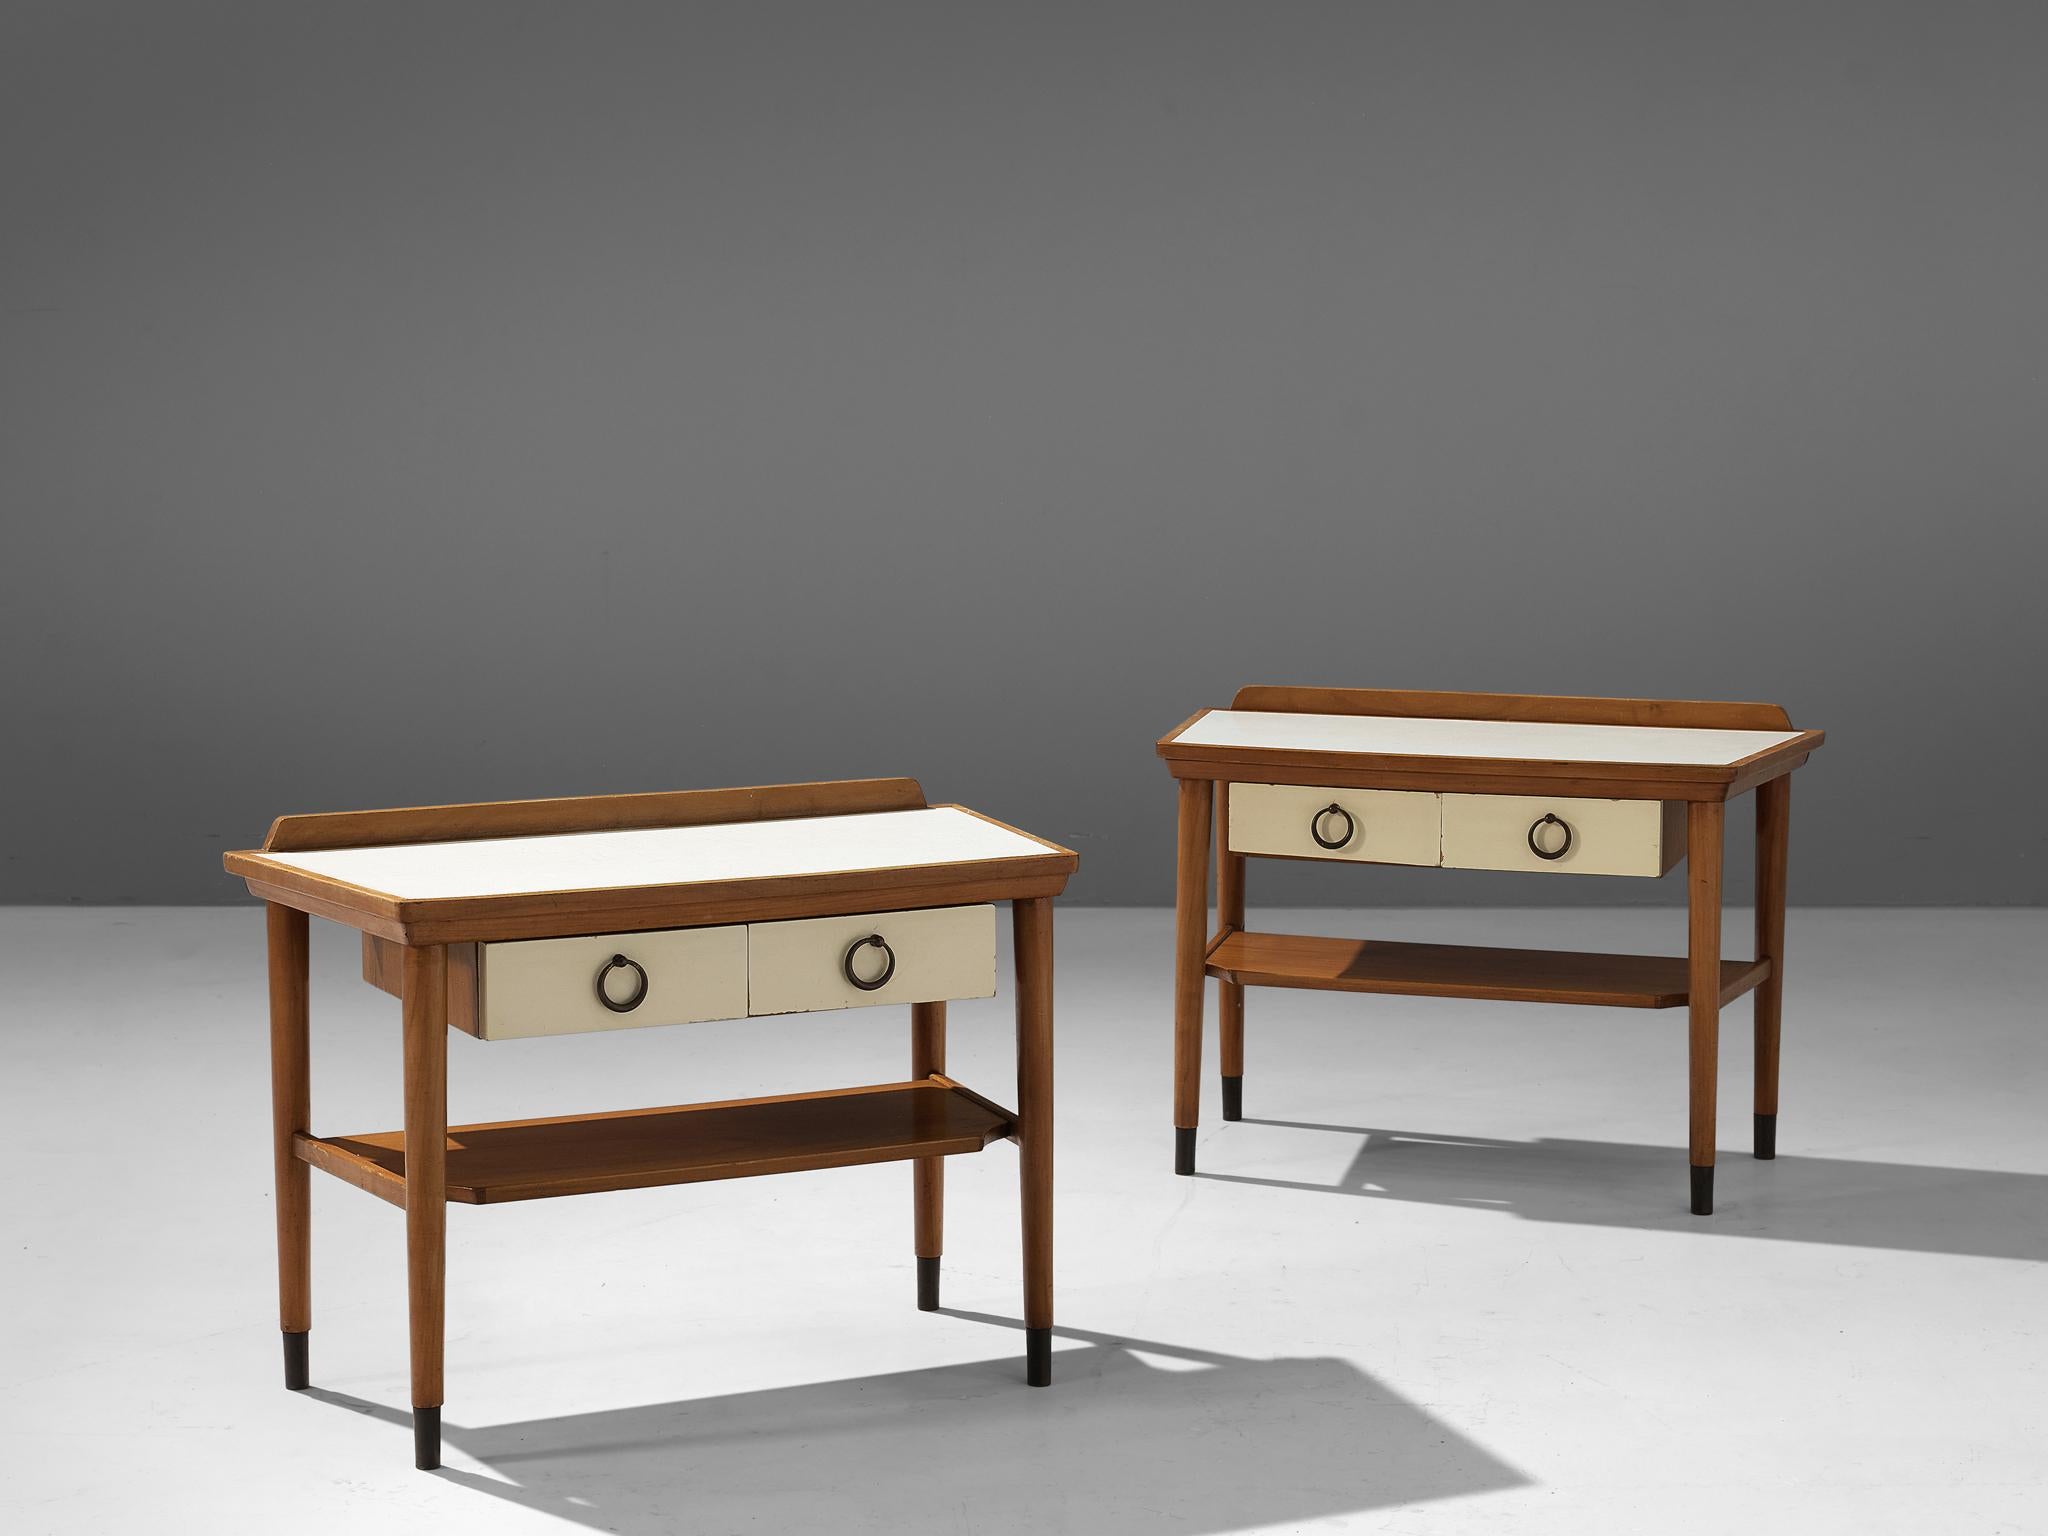 Pair of nightstands or small cabinets, cherry, lacquered wood, formica, Europe, 1960s

Modest and elegant pair of nightstands executed in cherry wood combined with white formica top and lacquered wooden fronts of the drawers. These items are made